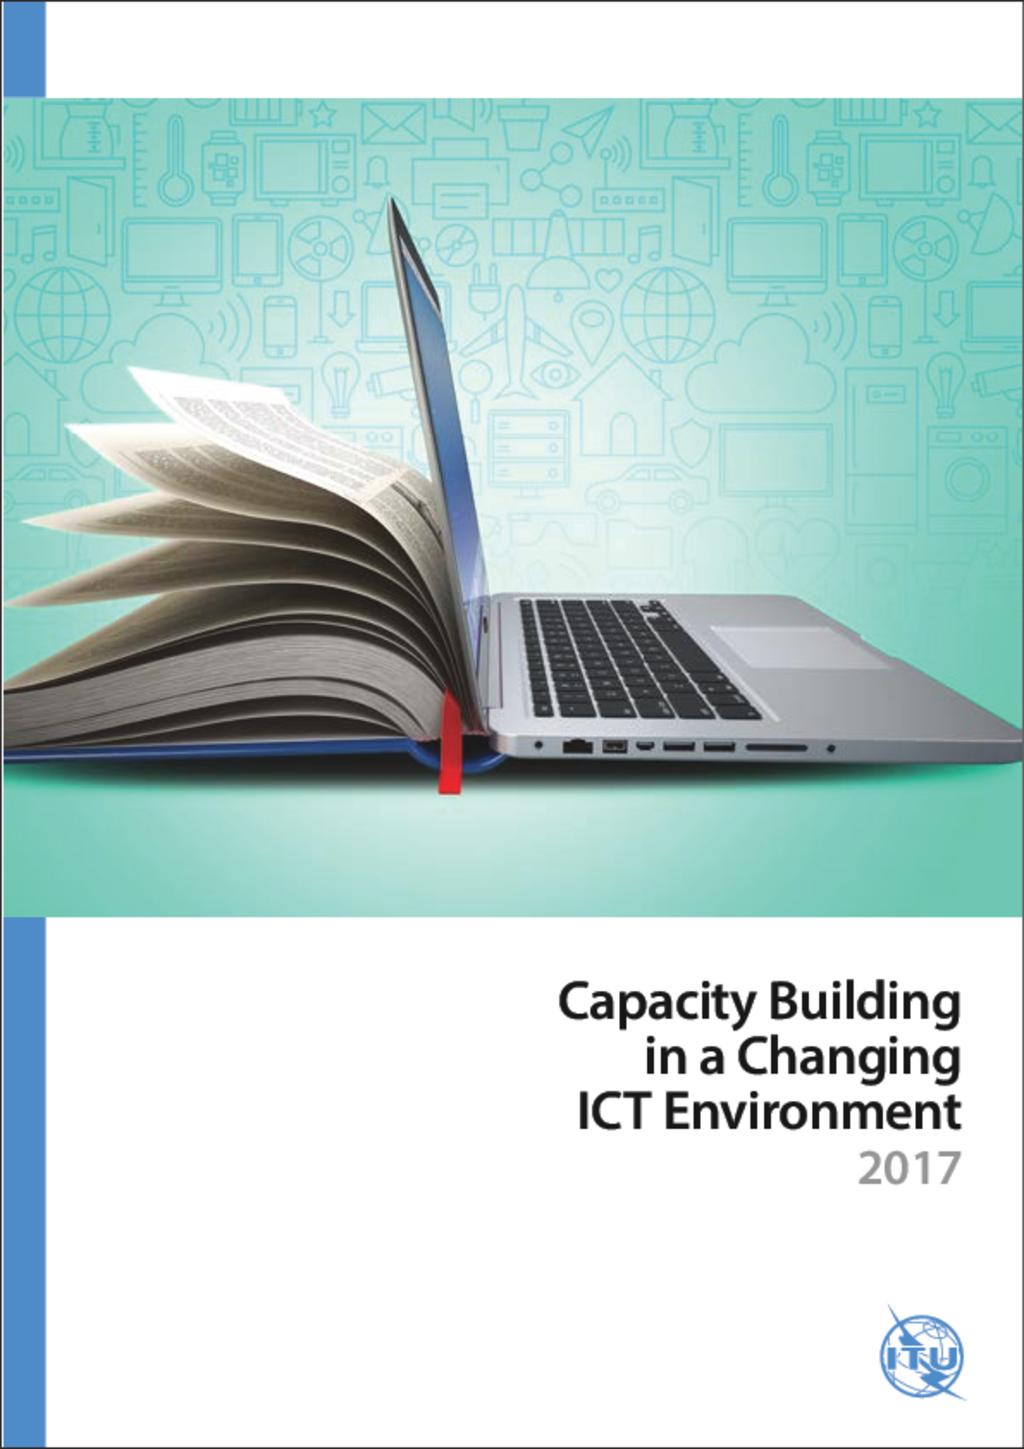 Capacity Building to use ICT